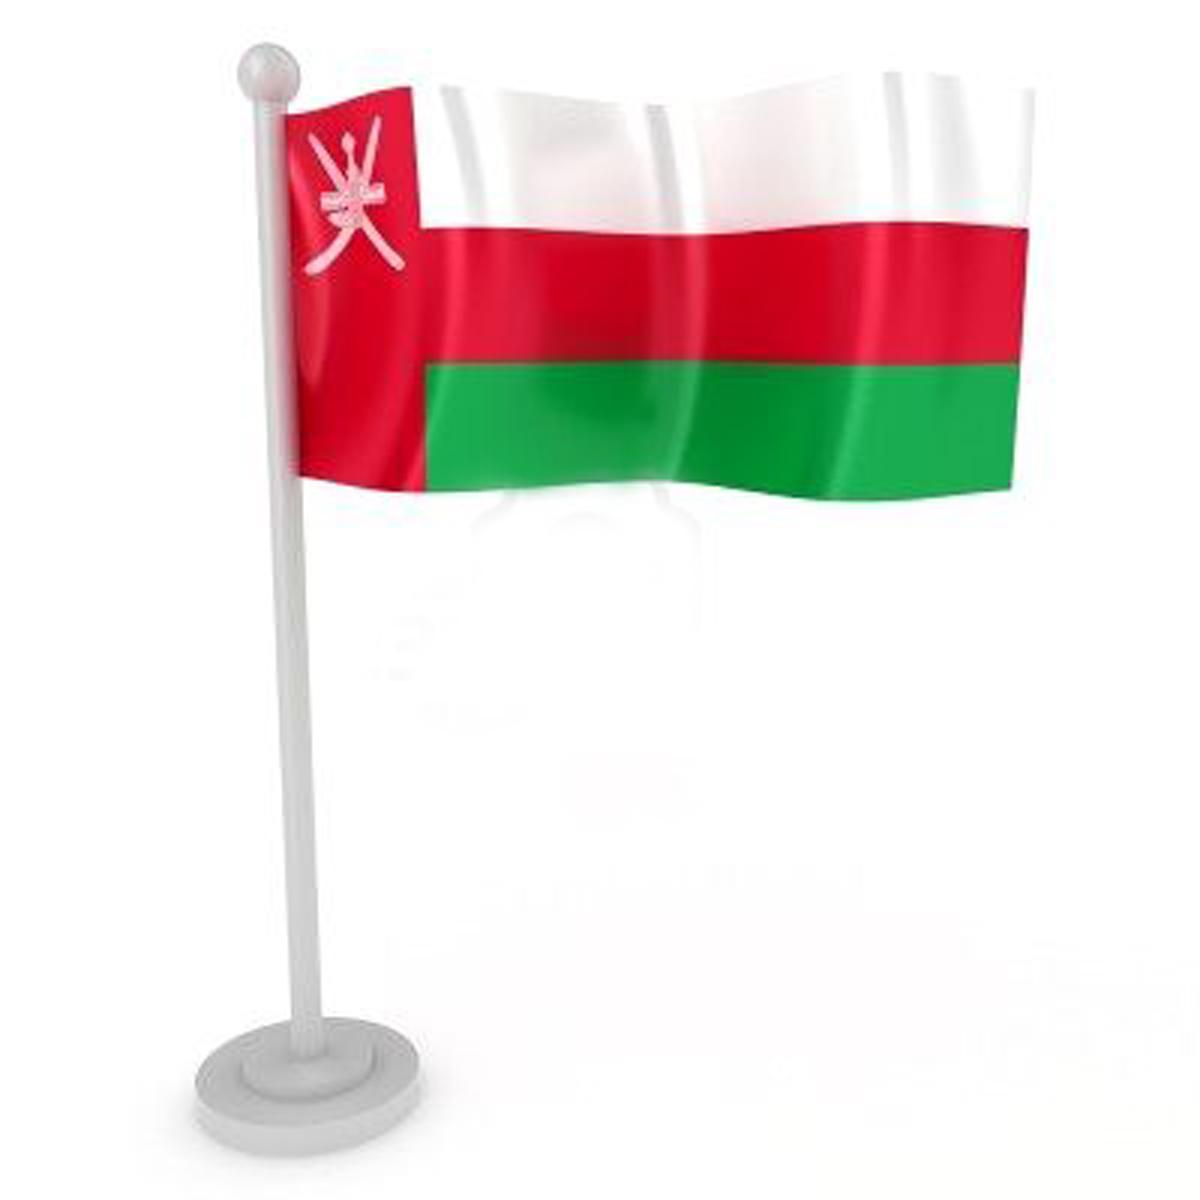 Graphics Wallpaper Flag Of Oman, Omani National Flag In Graphic